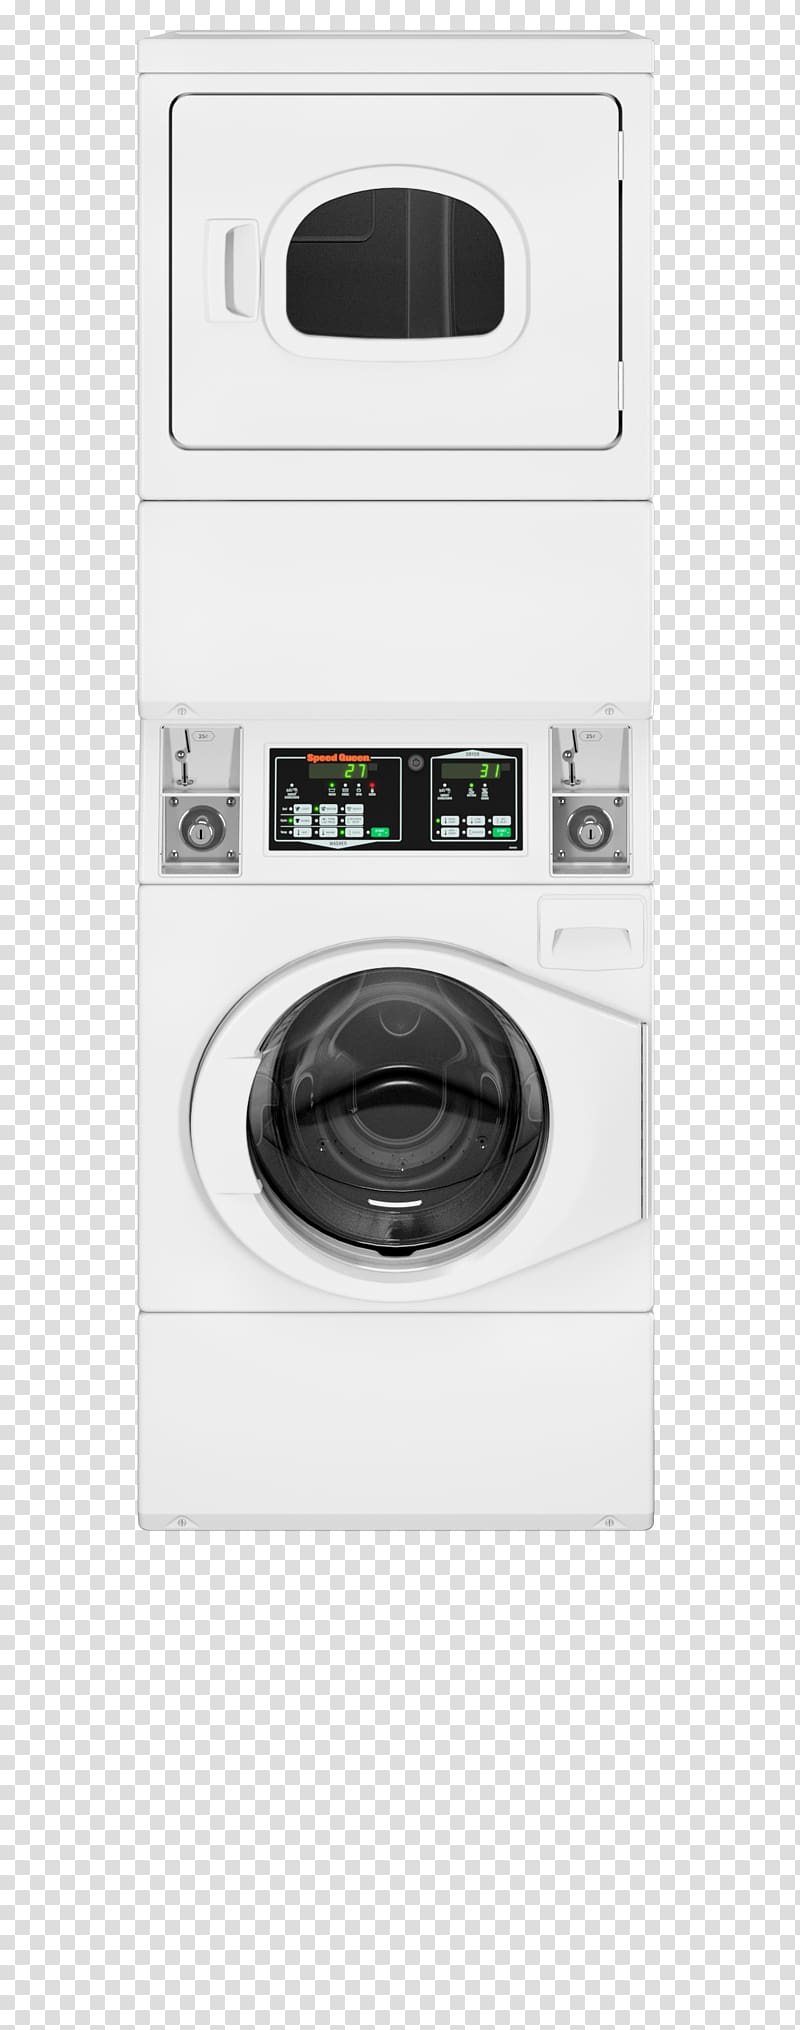 Clothes dryer Laundry Washing Machines Speed Queen Combo washer dryer, Fagor transparent background PNG clipart